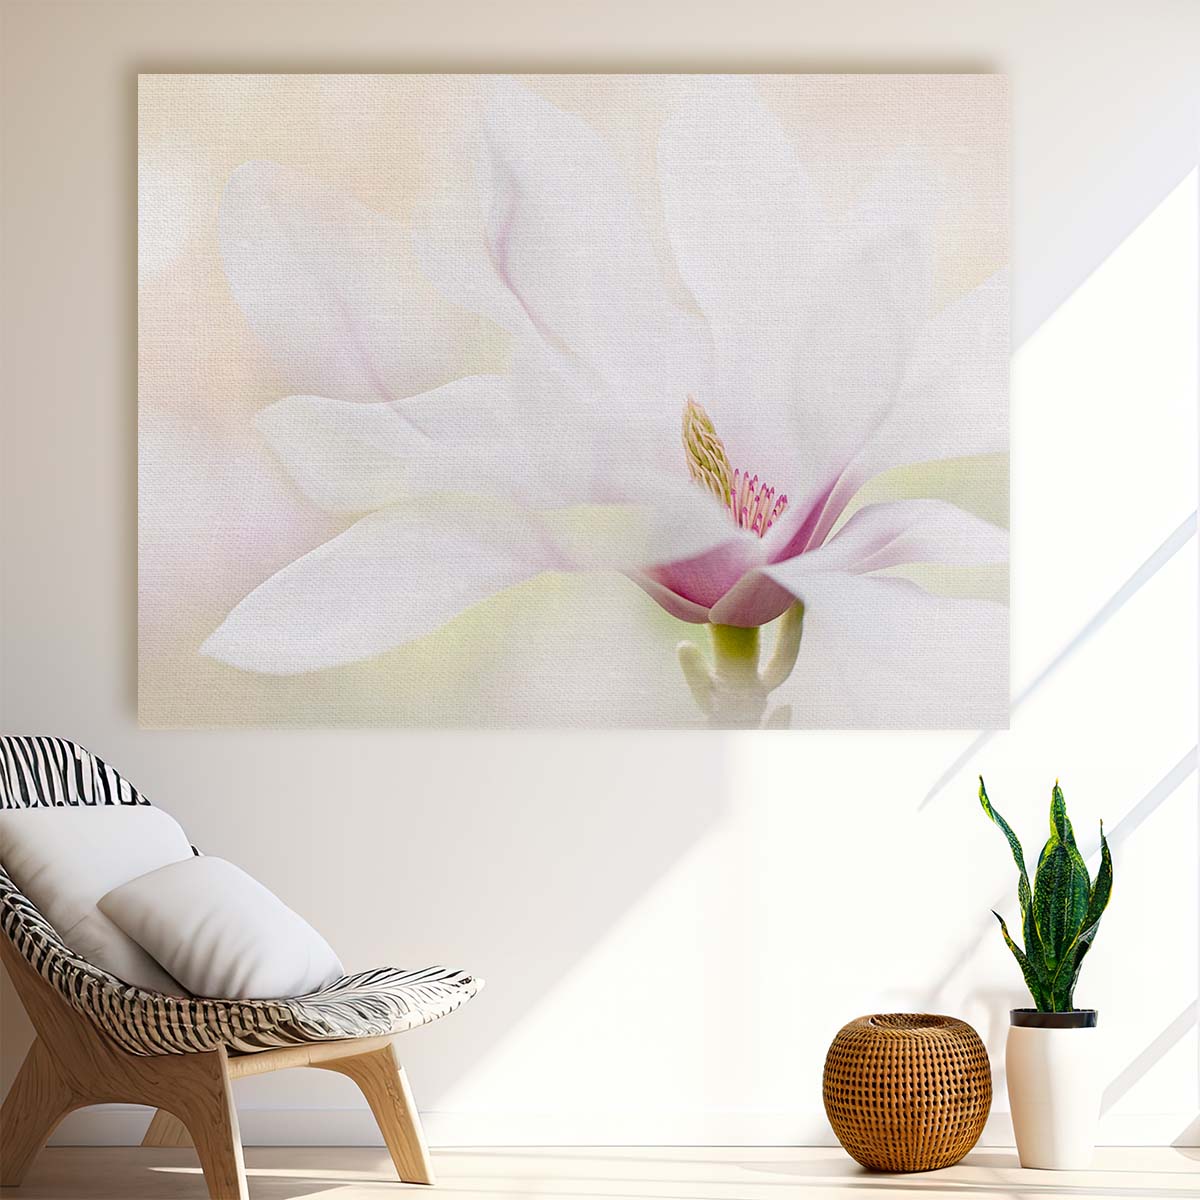 White Magnolia Bloom Macro Floral Garden Wall Art by Luxuriance Designs. Made in USA.